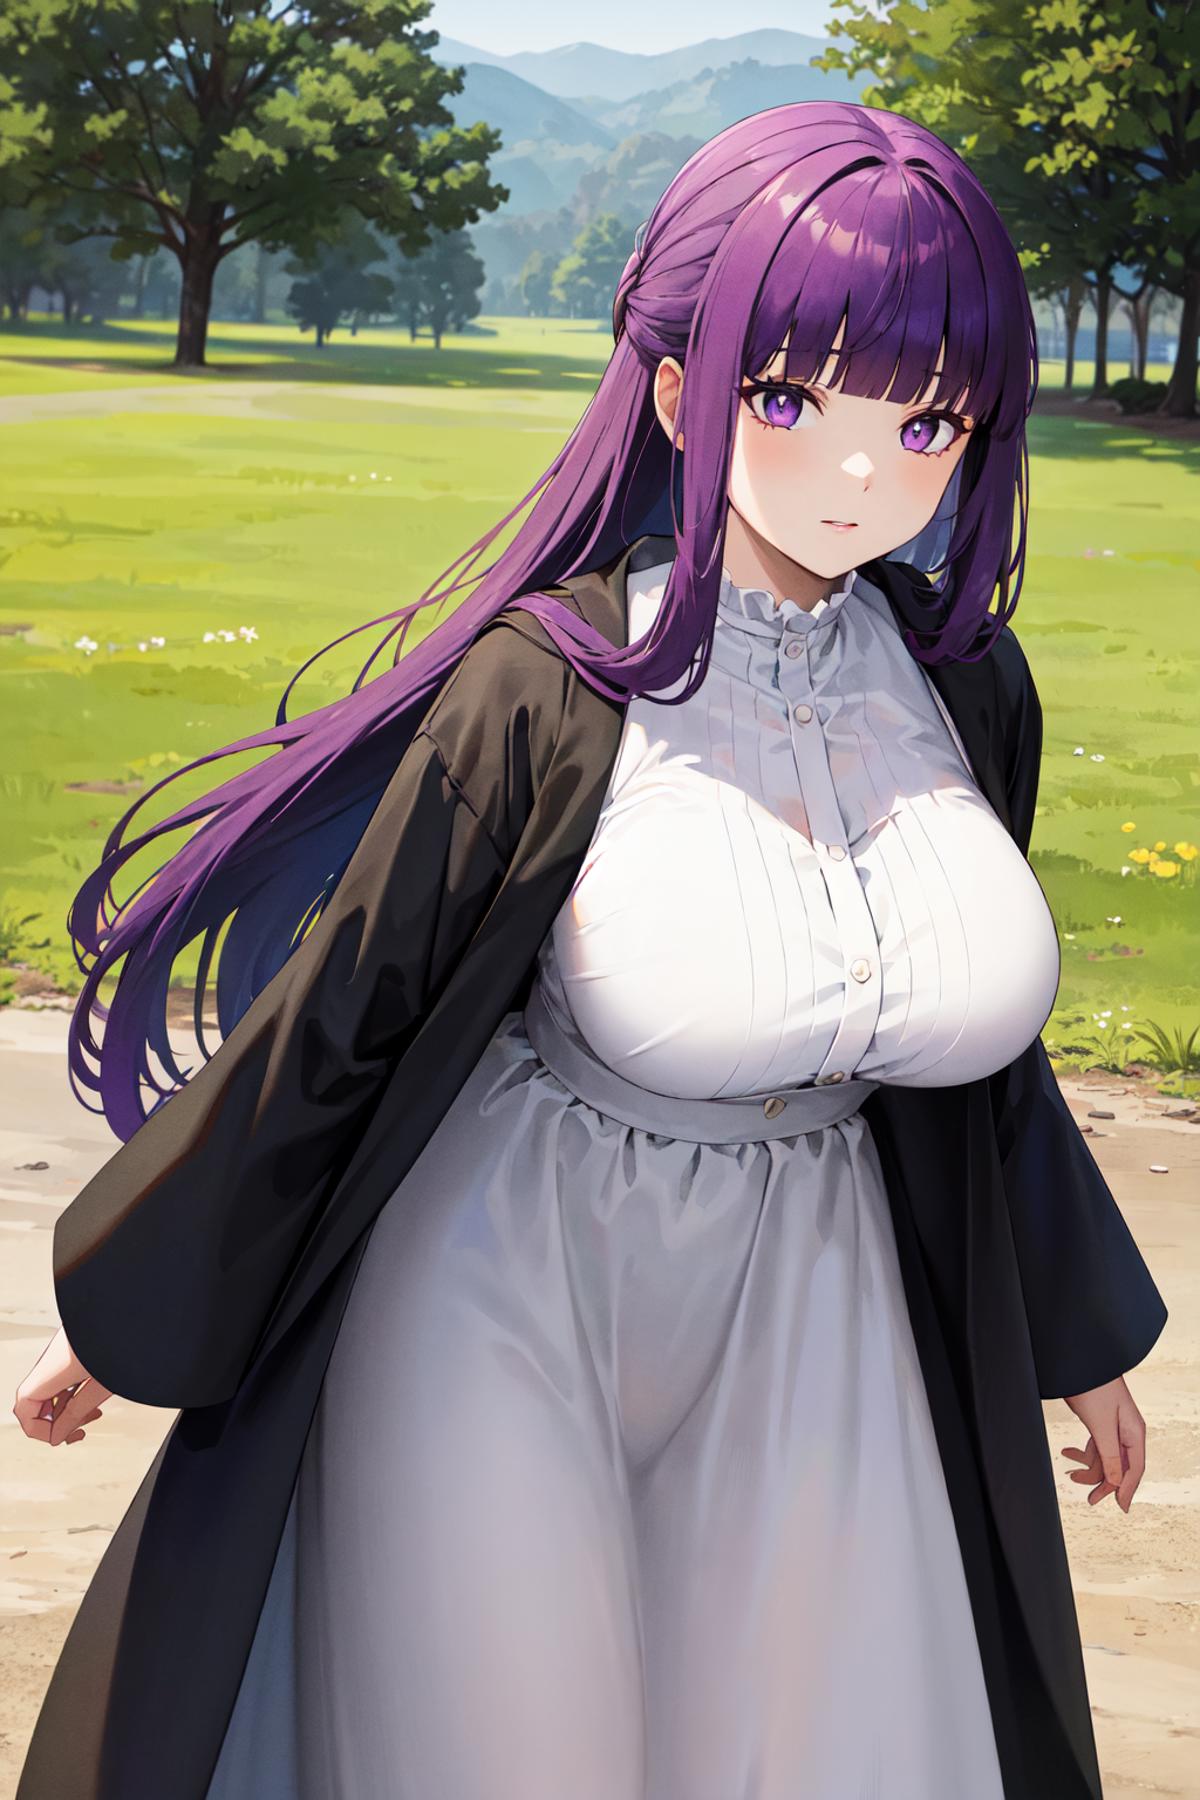 Anime Girl with Large Breasts and Purple Hair Wearing a Black Cape and Dress.